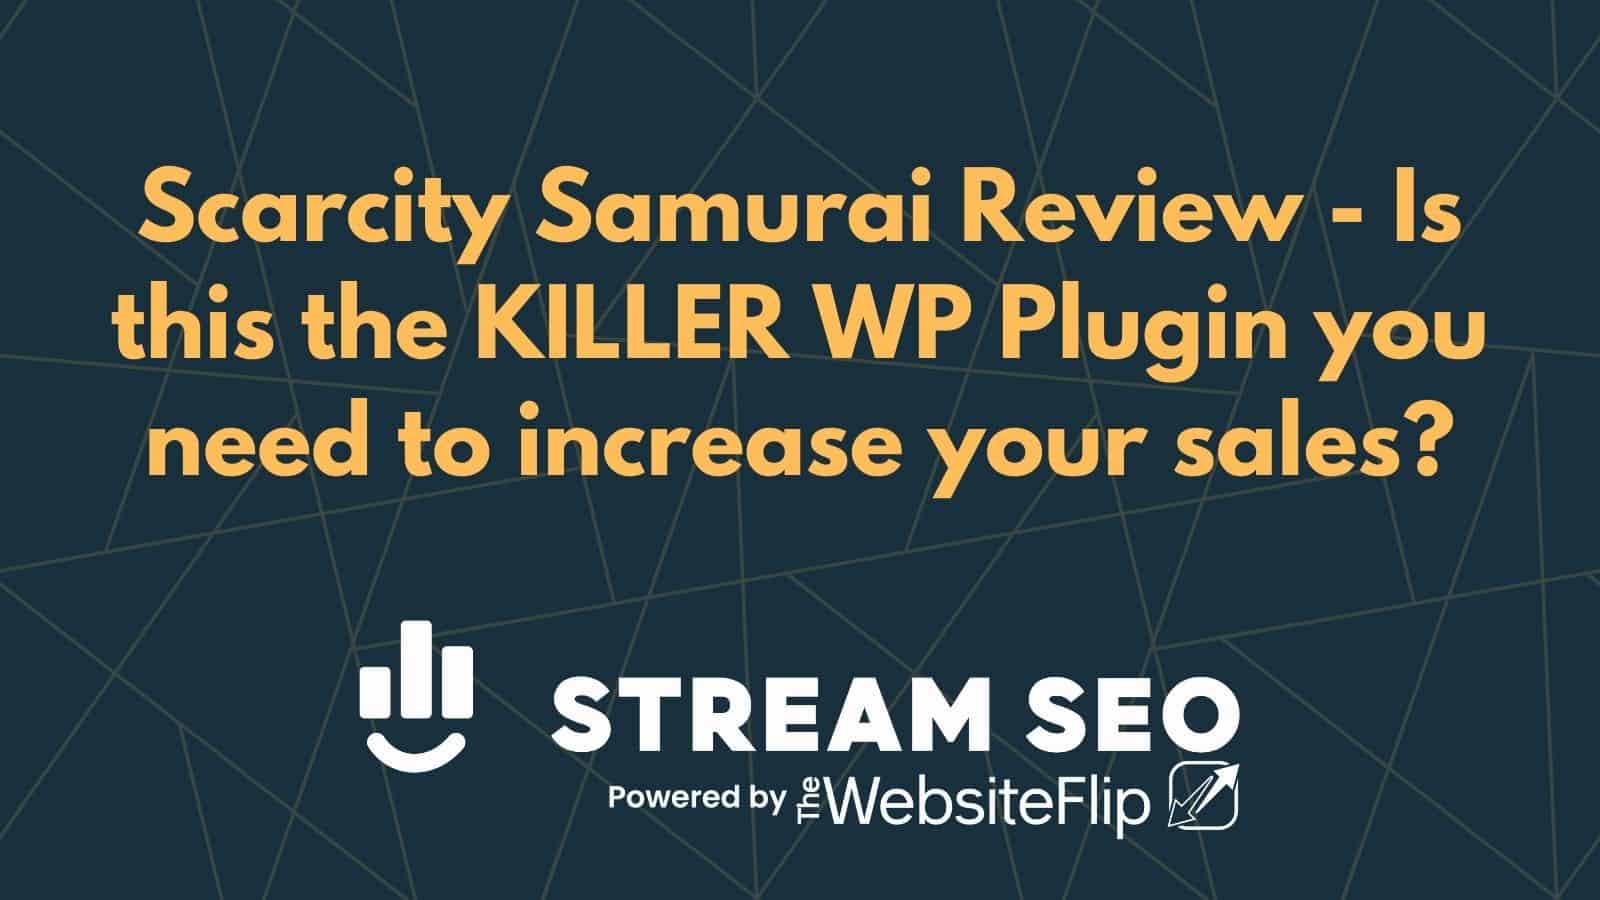 Scarcity Samurai Review – Is this the KILLER WP Plugin you need to increase your sales?